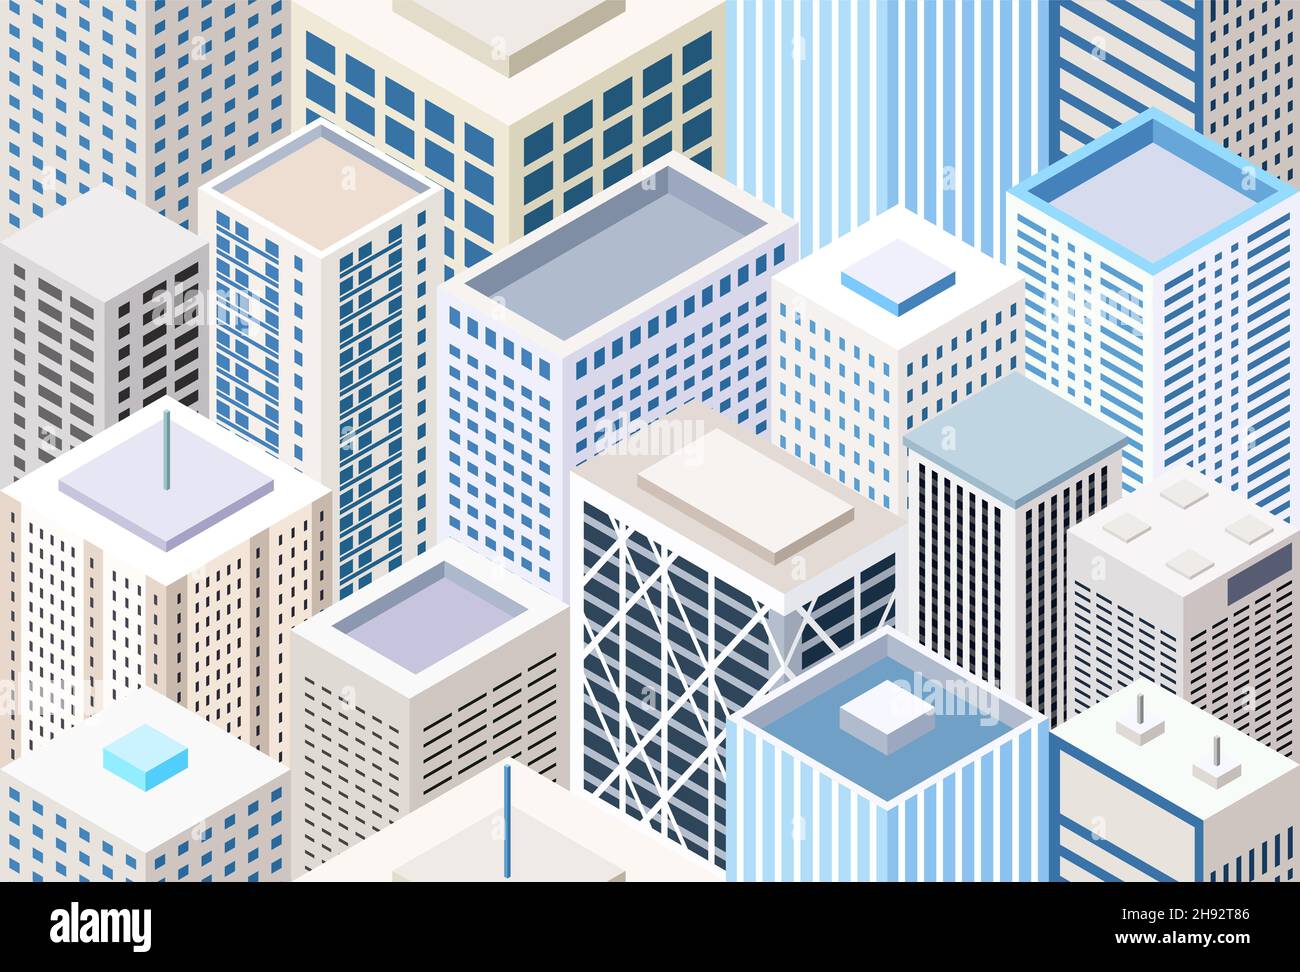 Flat style isometric city buildings vector seamless pattern Stock Vector